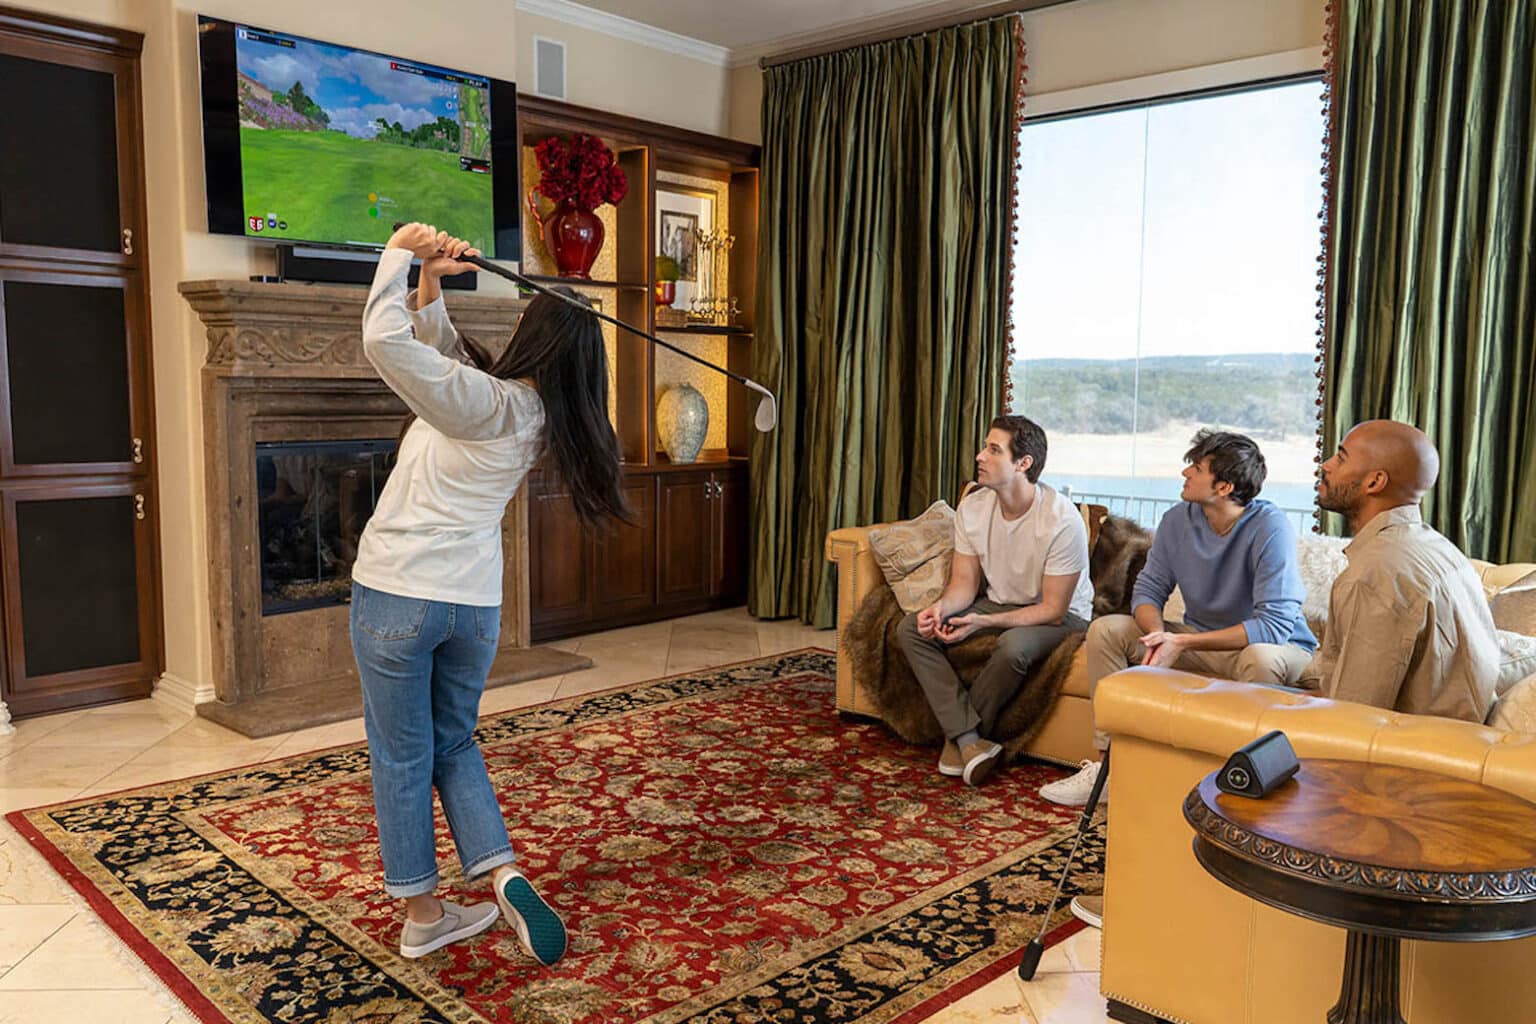 The only thing missing is a golf cart with this home golf simulator.